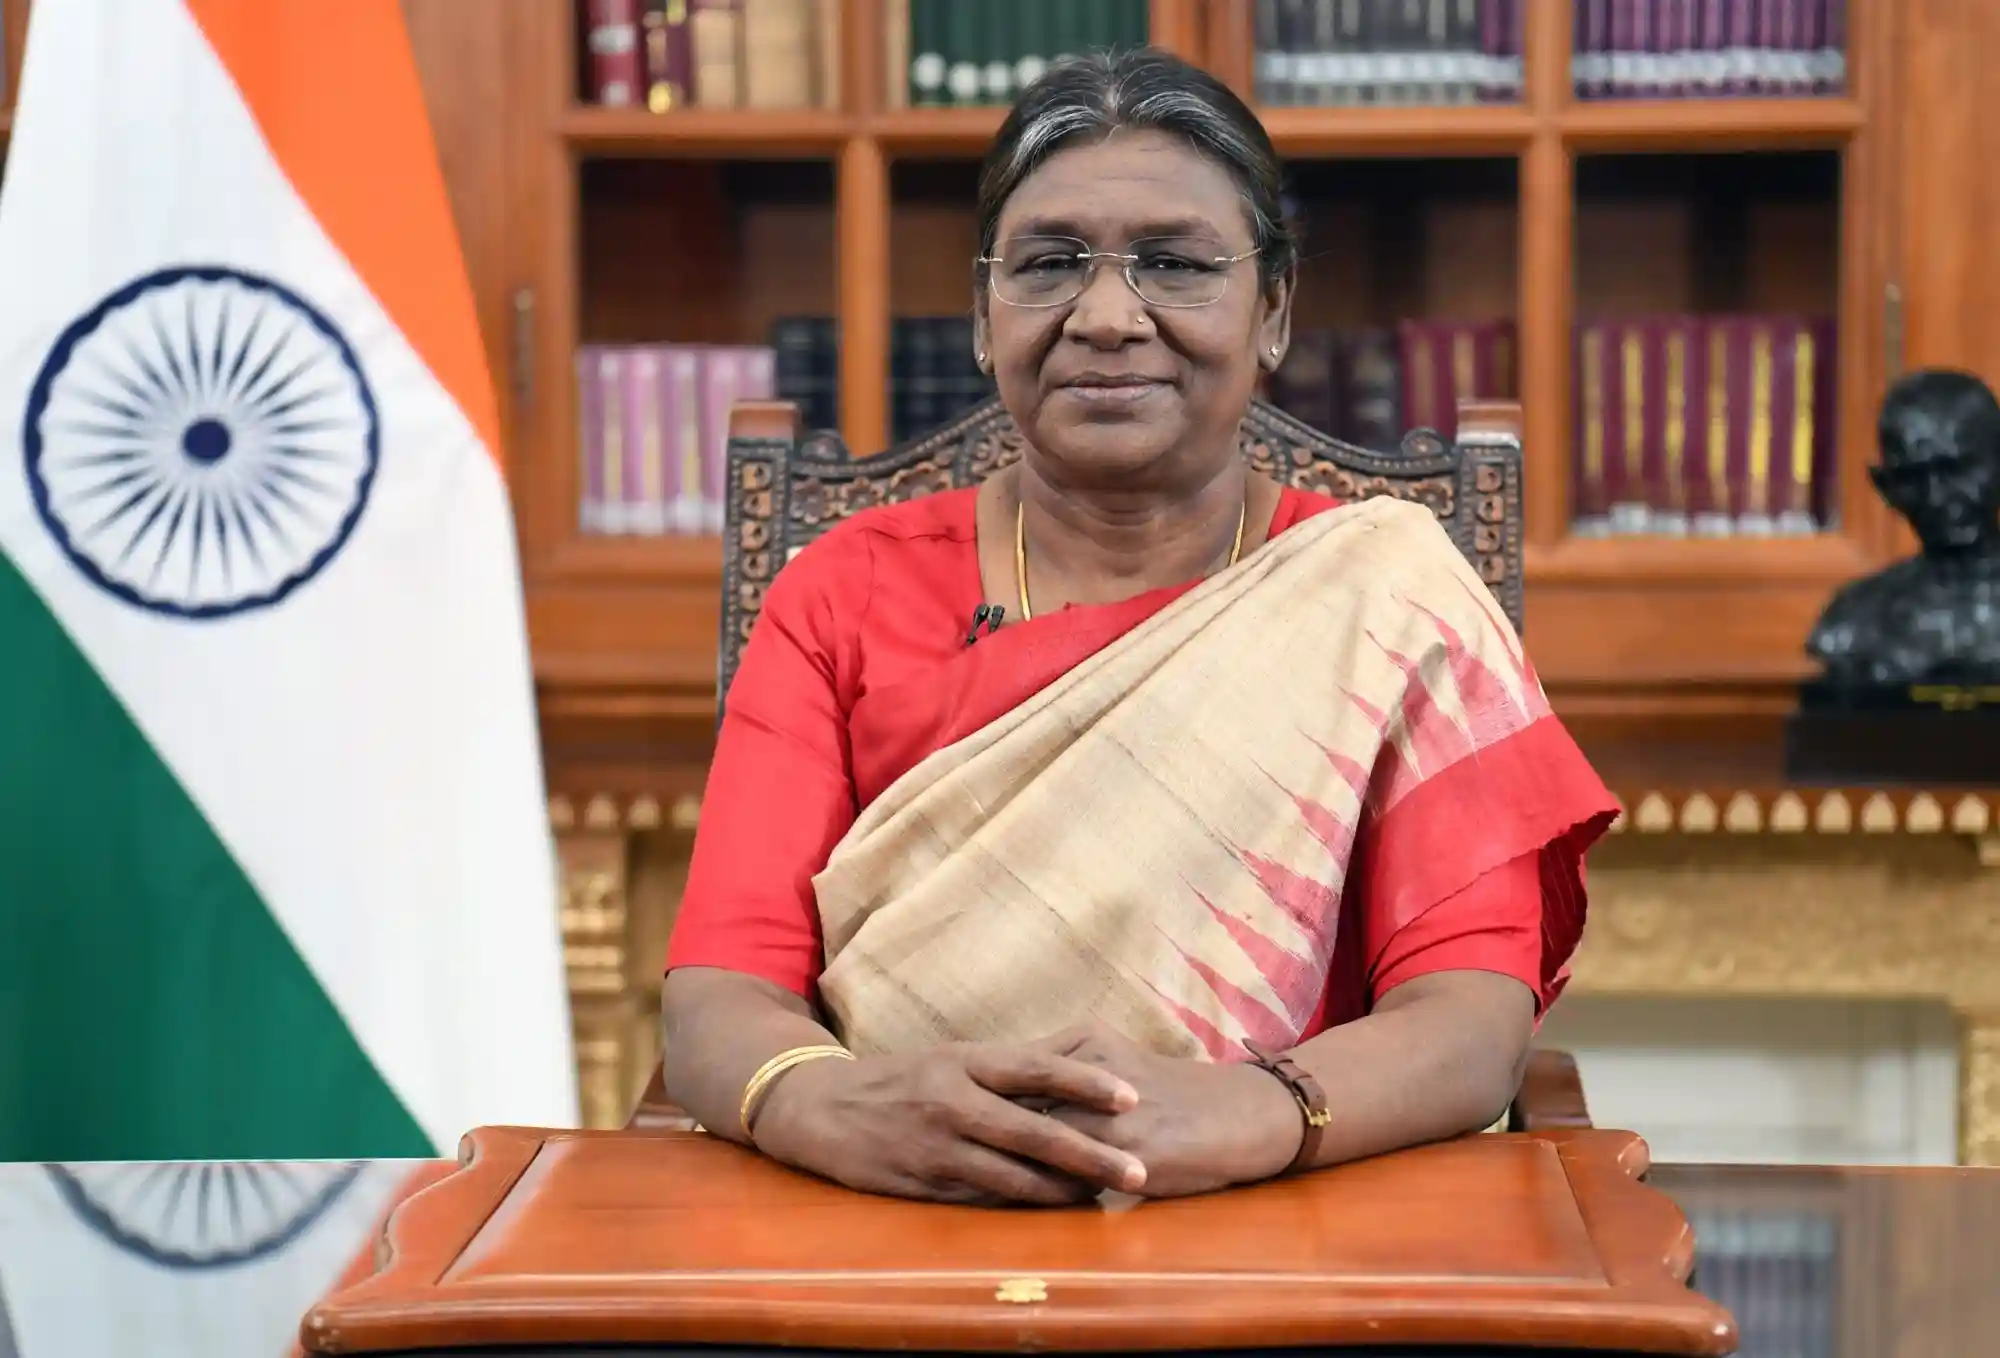 World has started to look at India with new sense of respect: President Murmu in Republic Day address